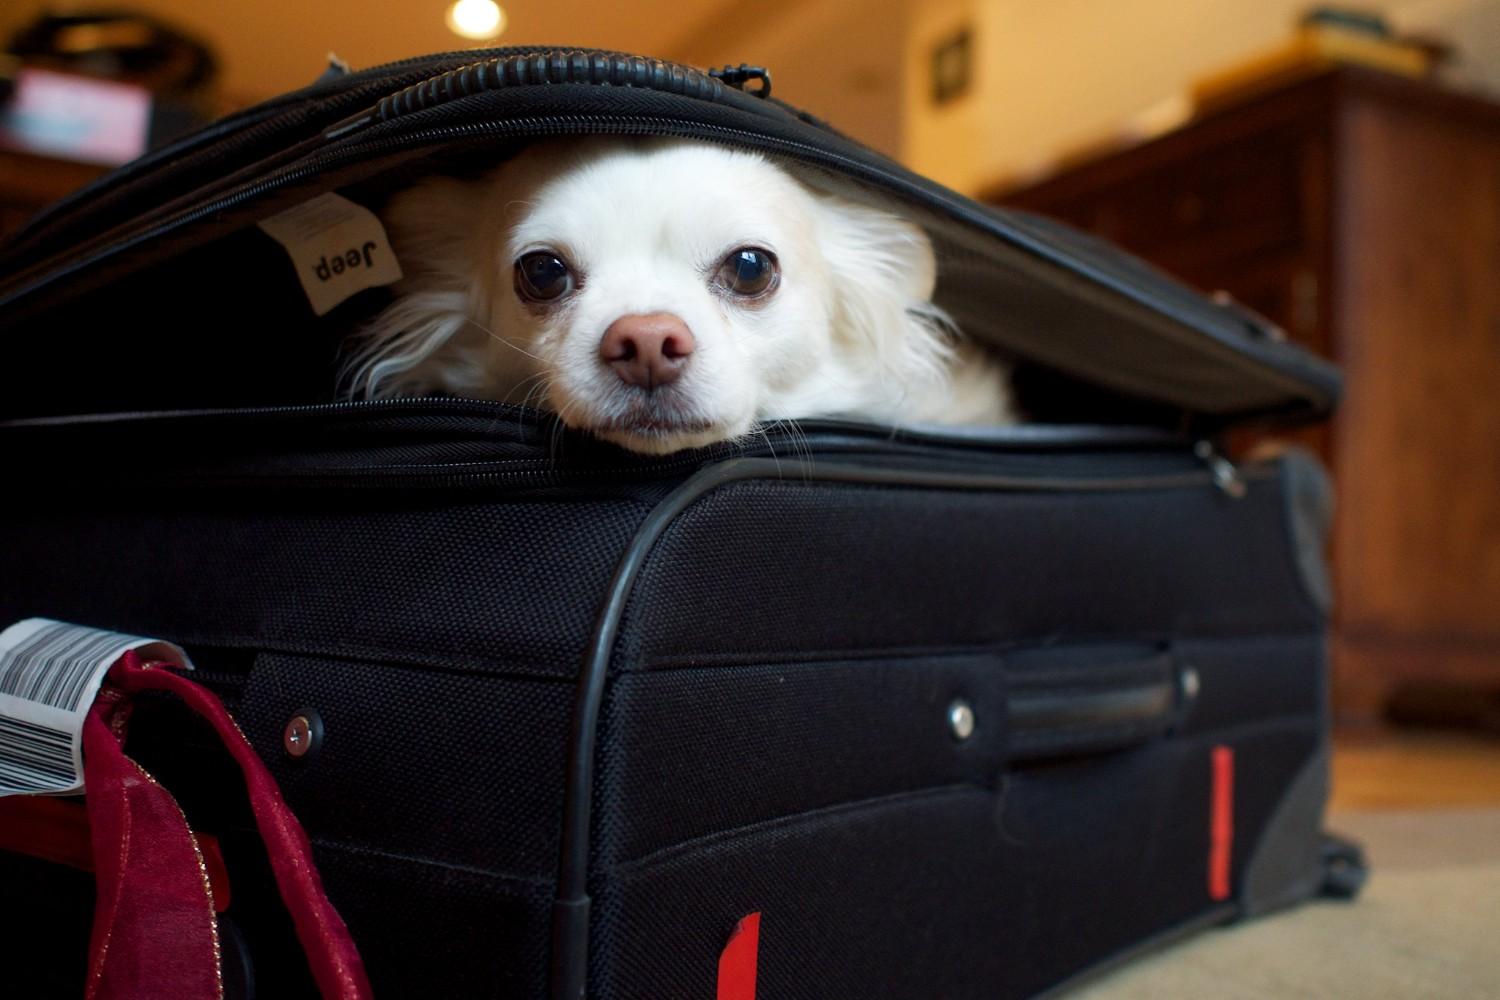 How to Train Your Dog for Travel